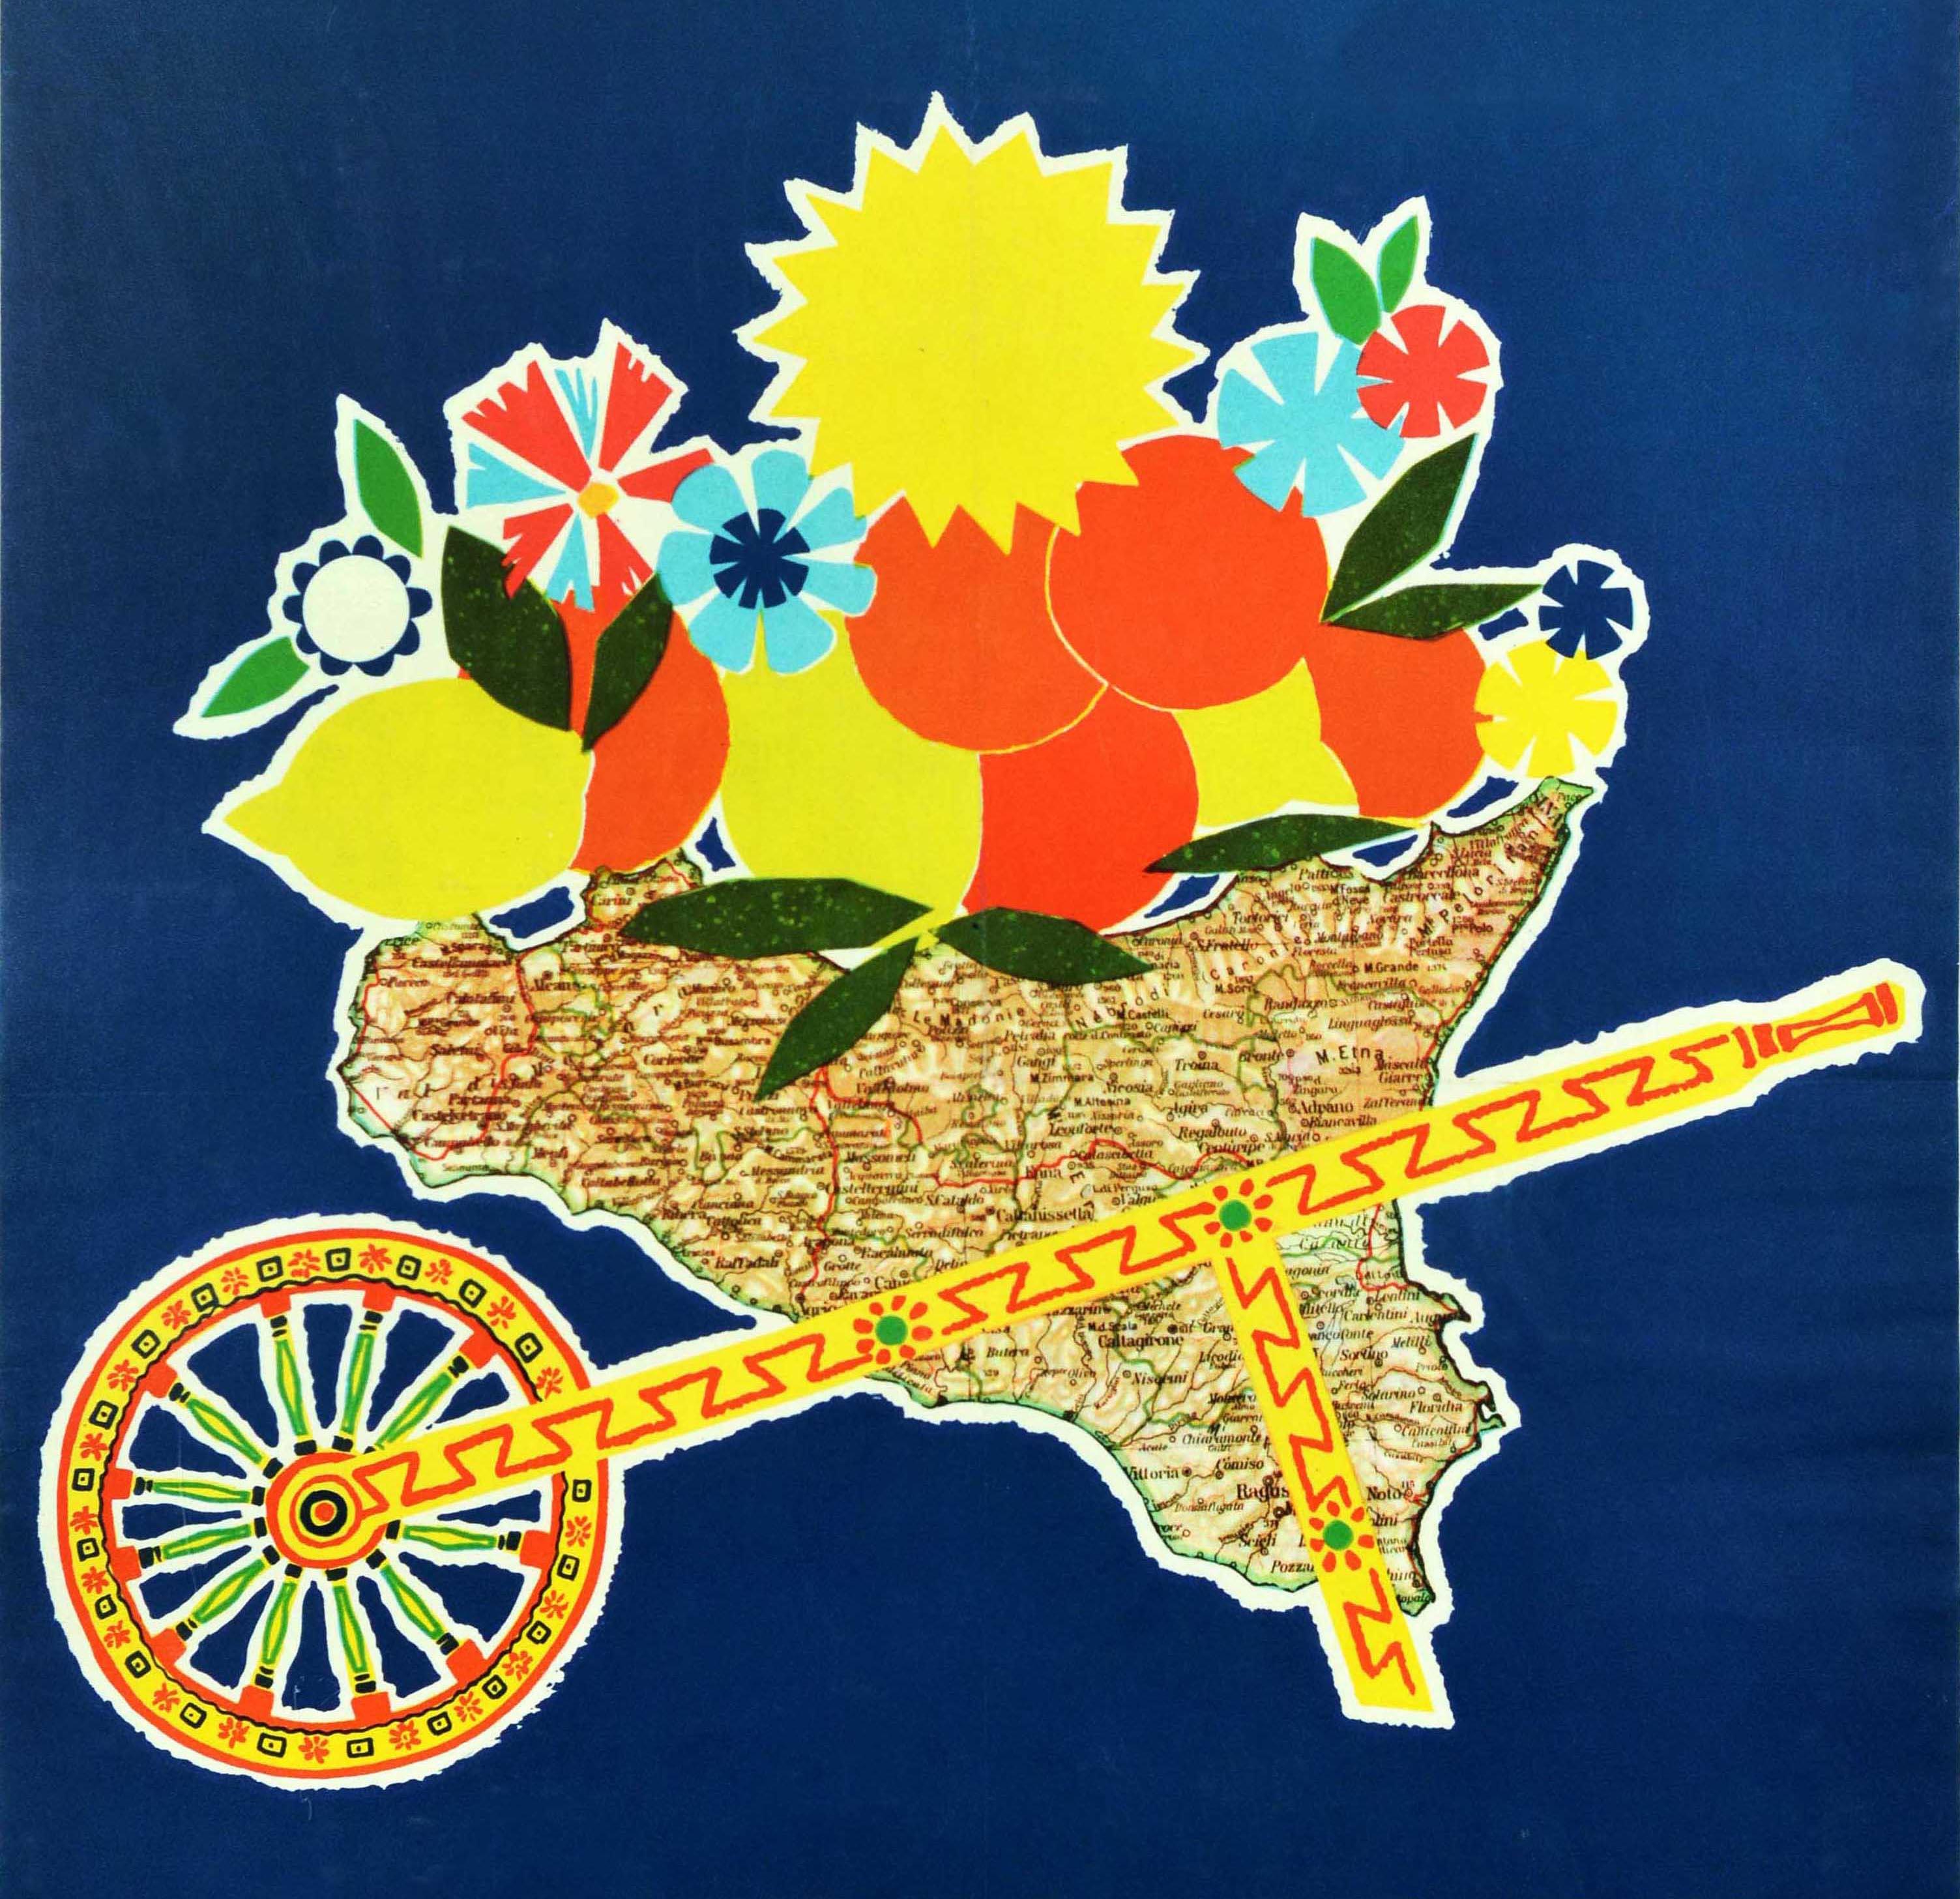 Original vintage Italy travel poster for Summer in Sicily / Estate in Sicilia featuring a great design depicting a map of the Mediterranean island as a wheelbarrow full of colourful fruit and flowers with decorative fixtures on the sides and wheel